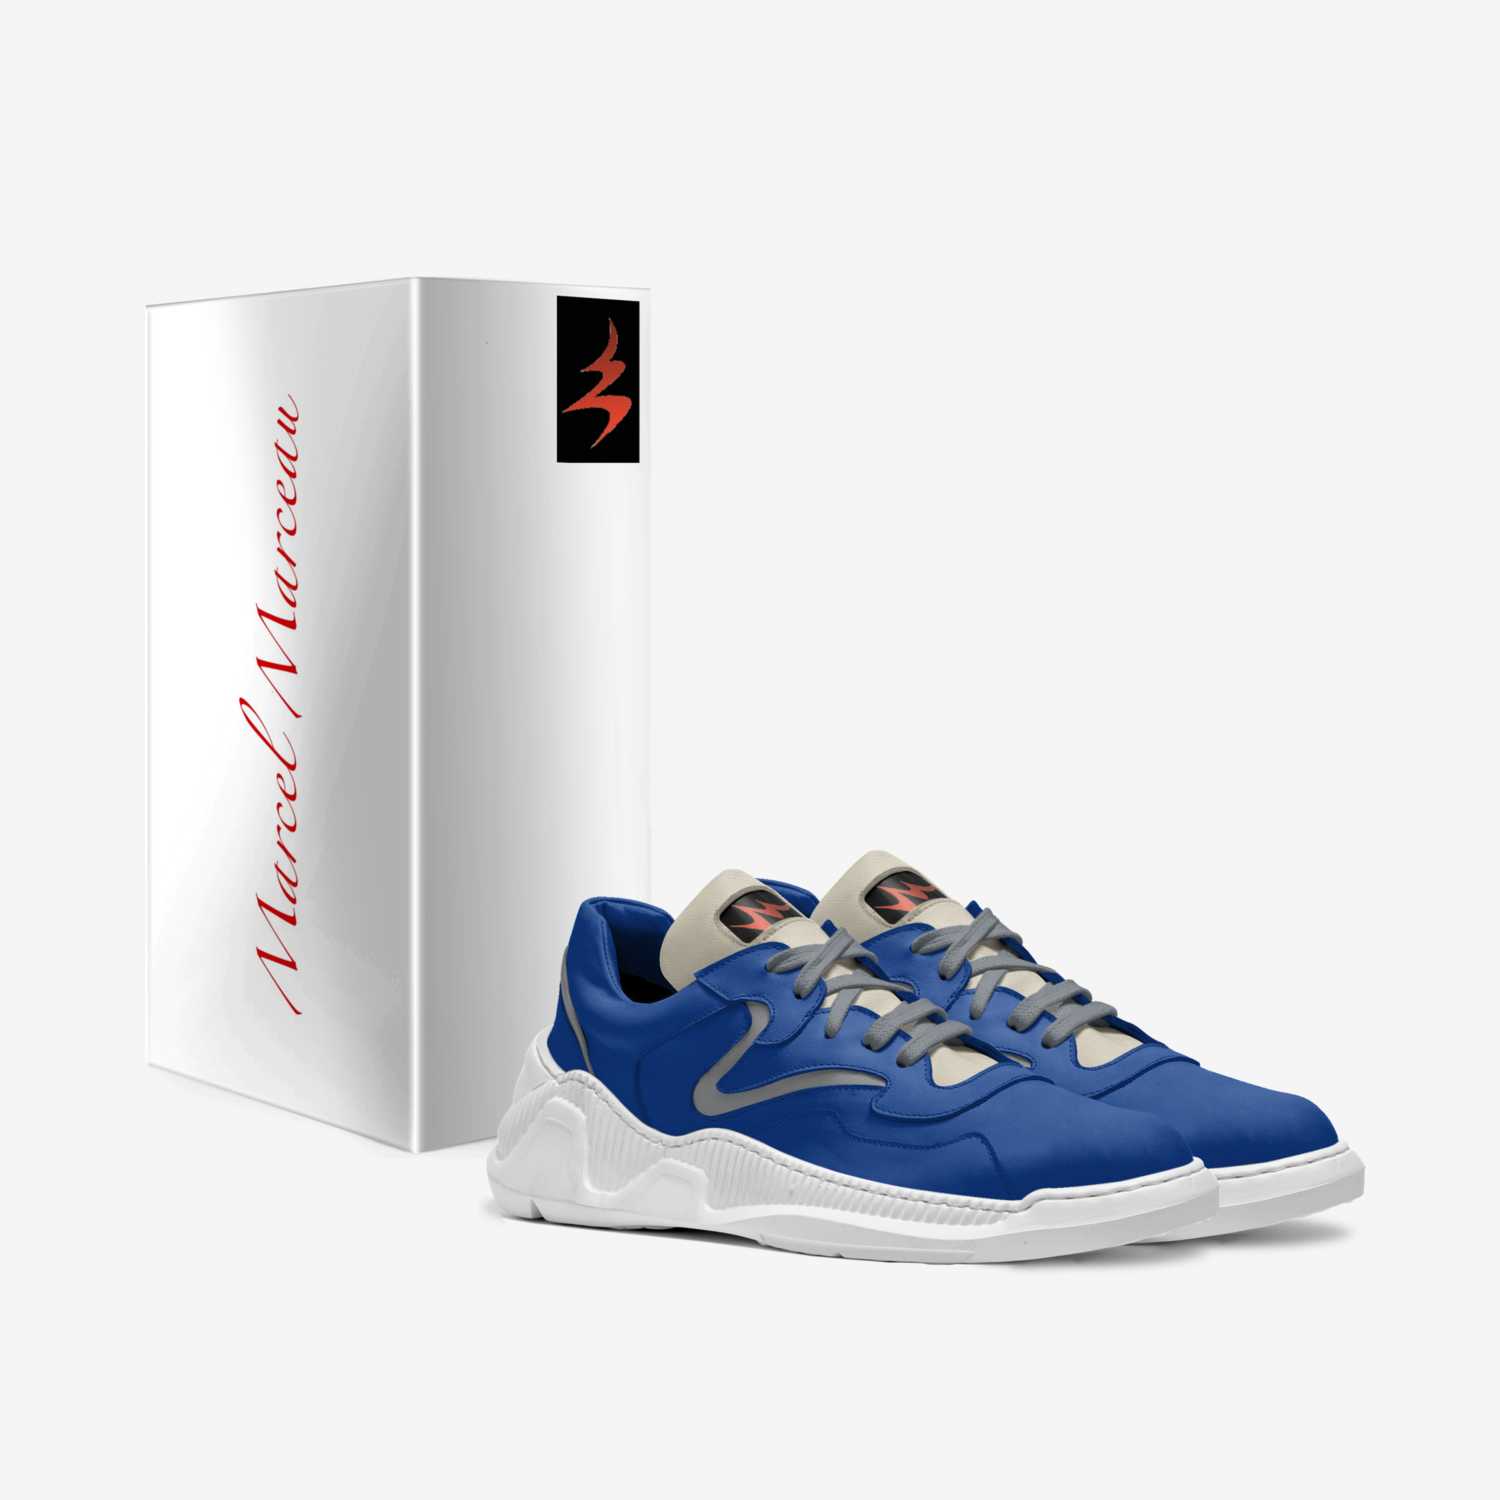 Blue Flu custom made in Italy shoes by Marcel Copeland | Box view